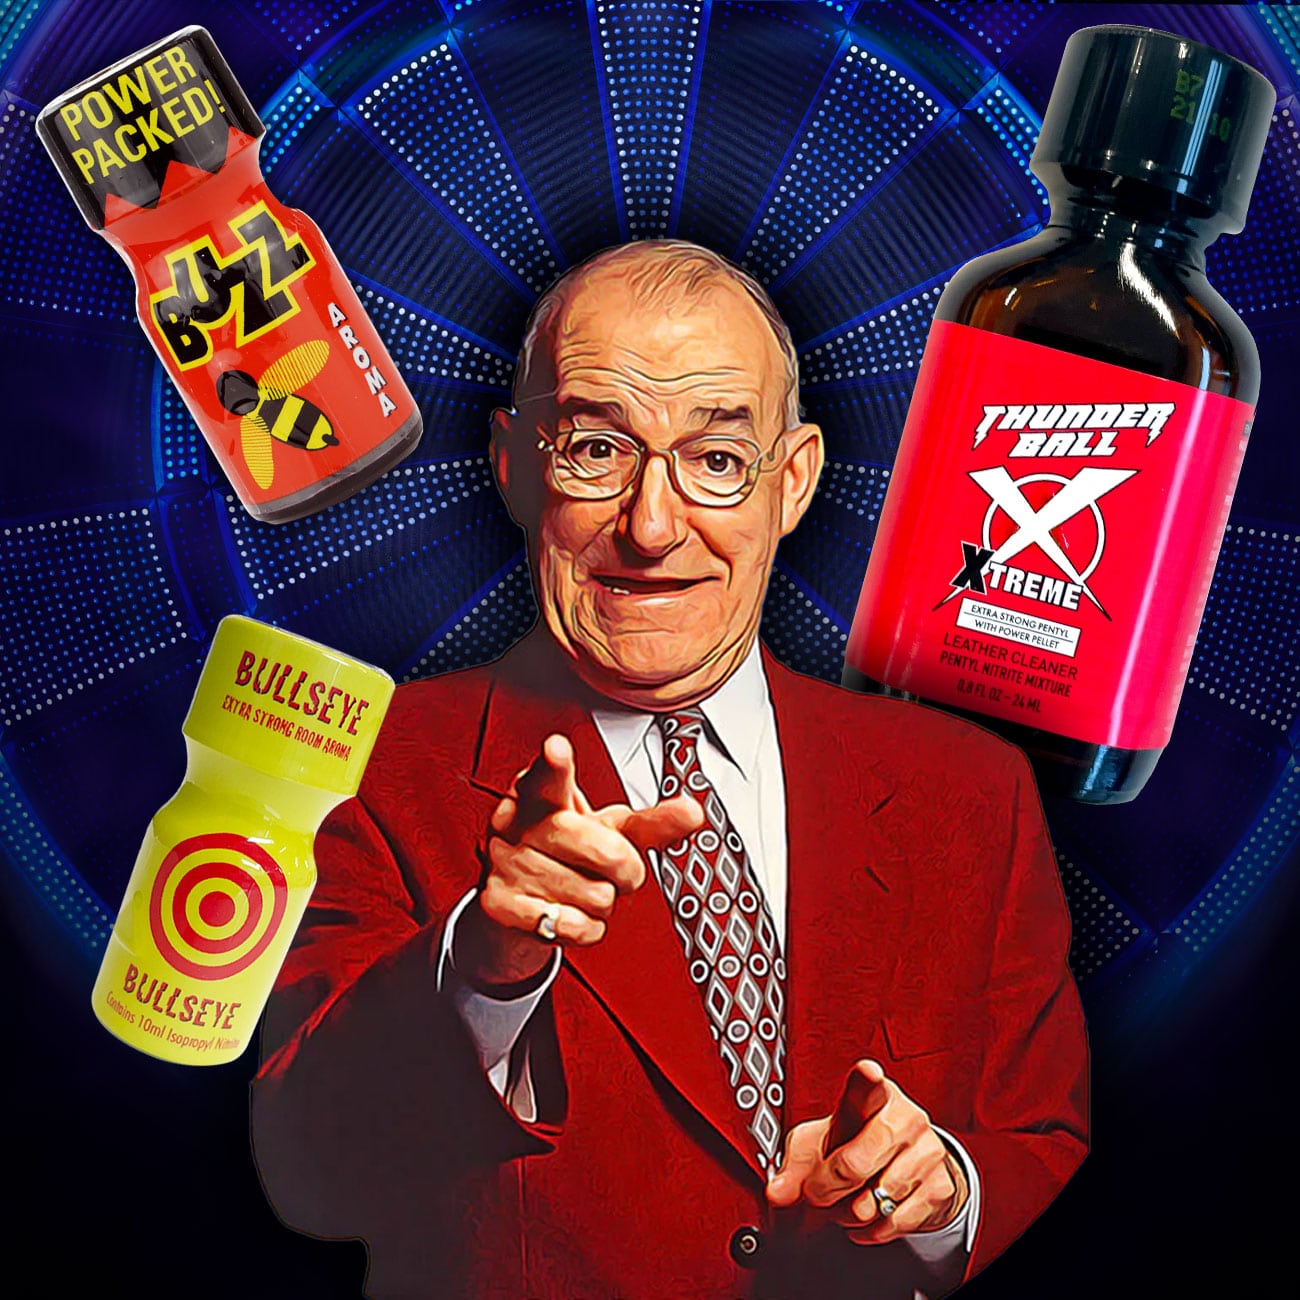 A cheerful man in a suit and bowtie points directly at the viewer, surrounded by an array of colorful The Bullseye Pack energy drink products with vibrant logos, set against a dynamic, radiating blue